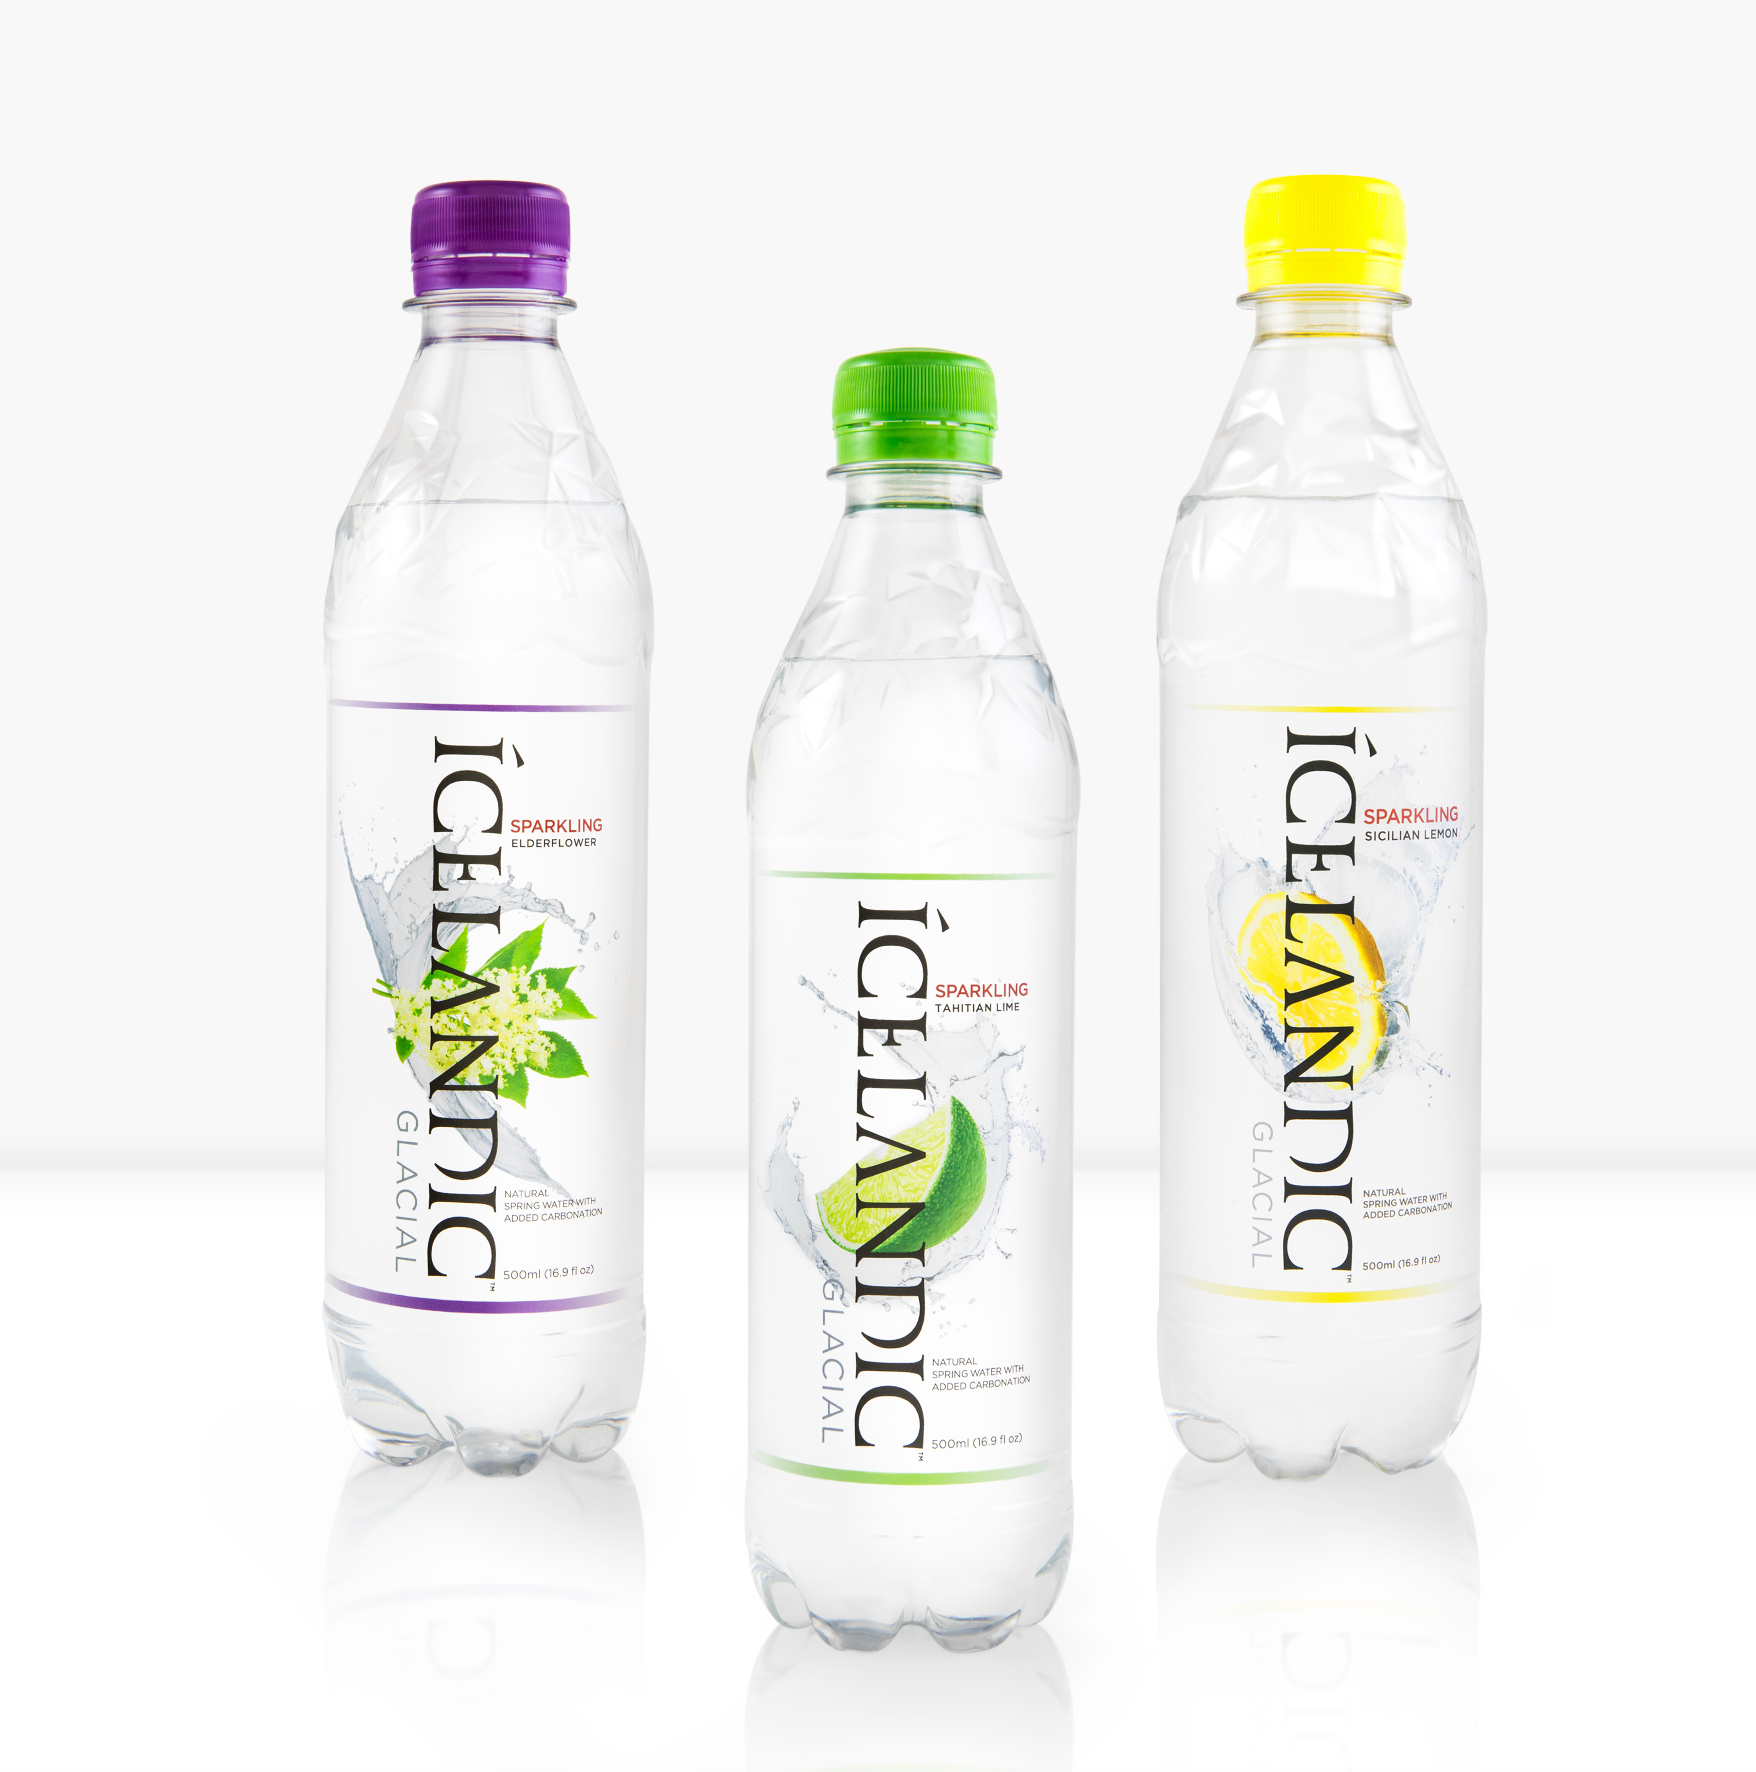 Icelandic Glacial™ to Release Highly Anticipated Line of Flavored Sparkling Waters in Iceland